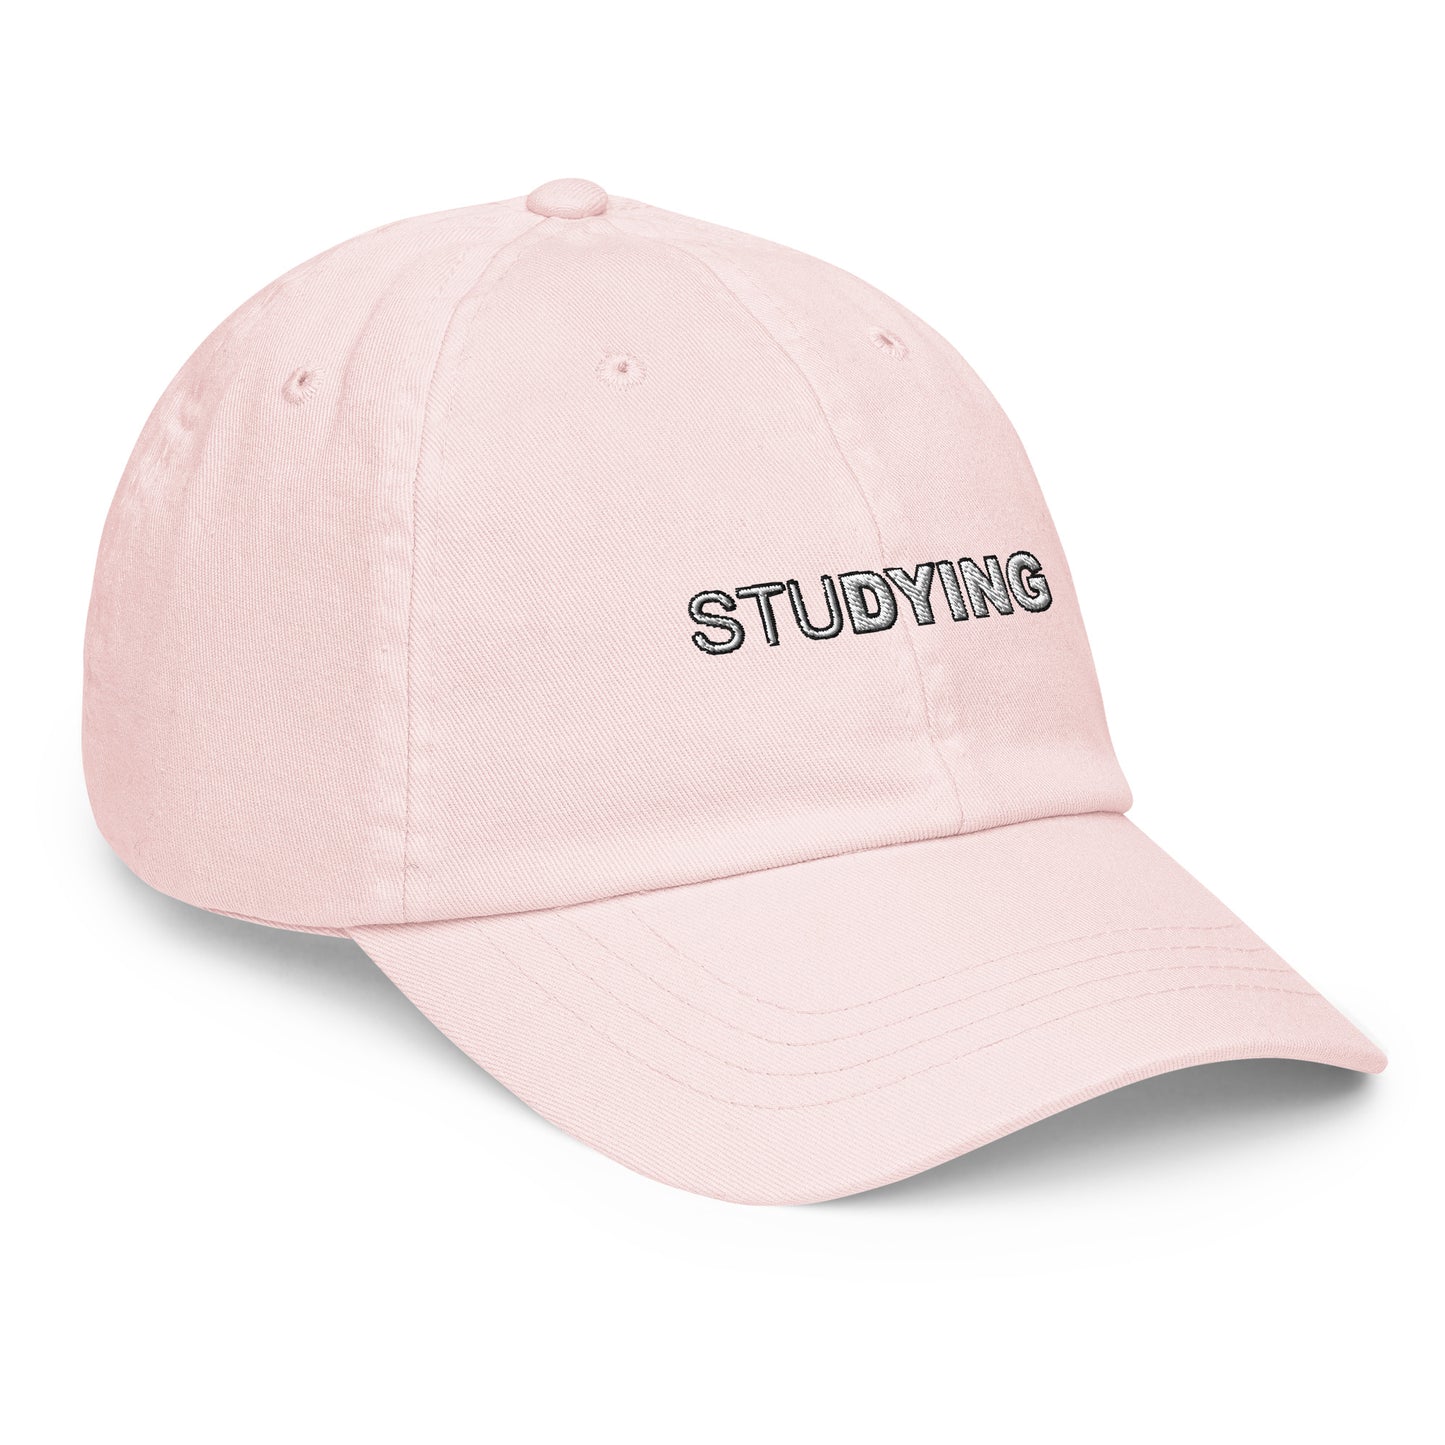 Studying Embroidered Pastel Hat